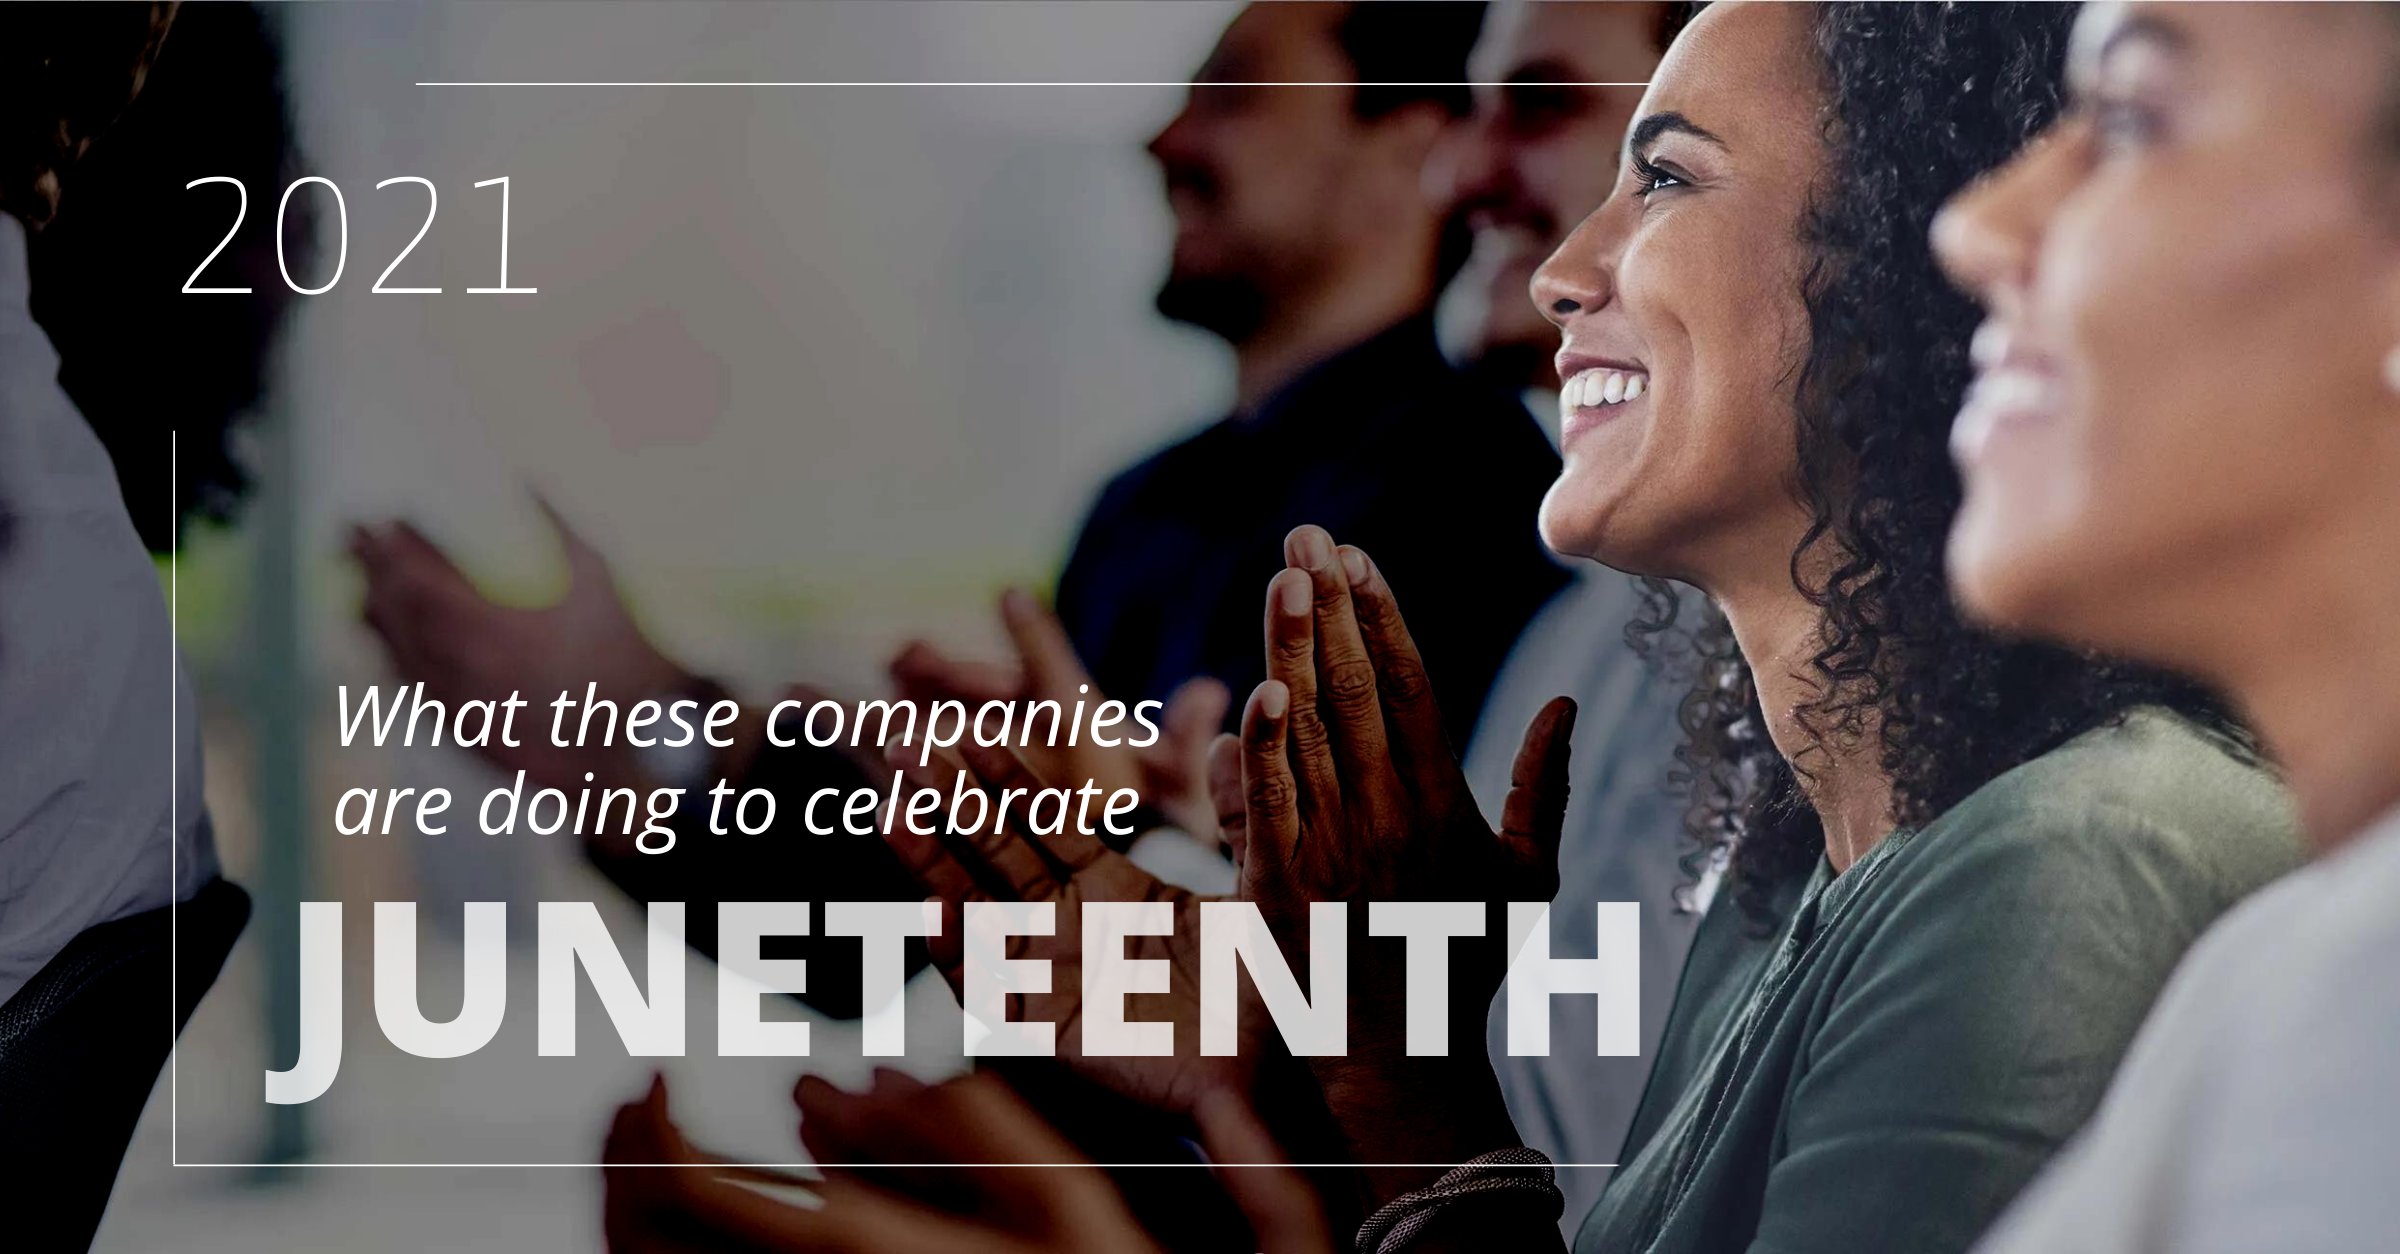 What These Companies Are Doing to Celebrate Juneteenth 2021